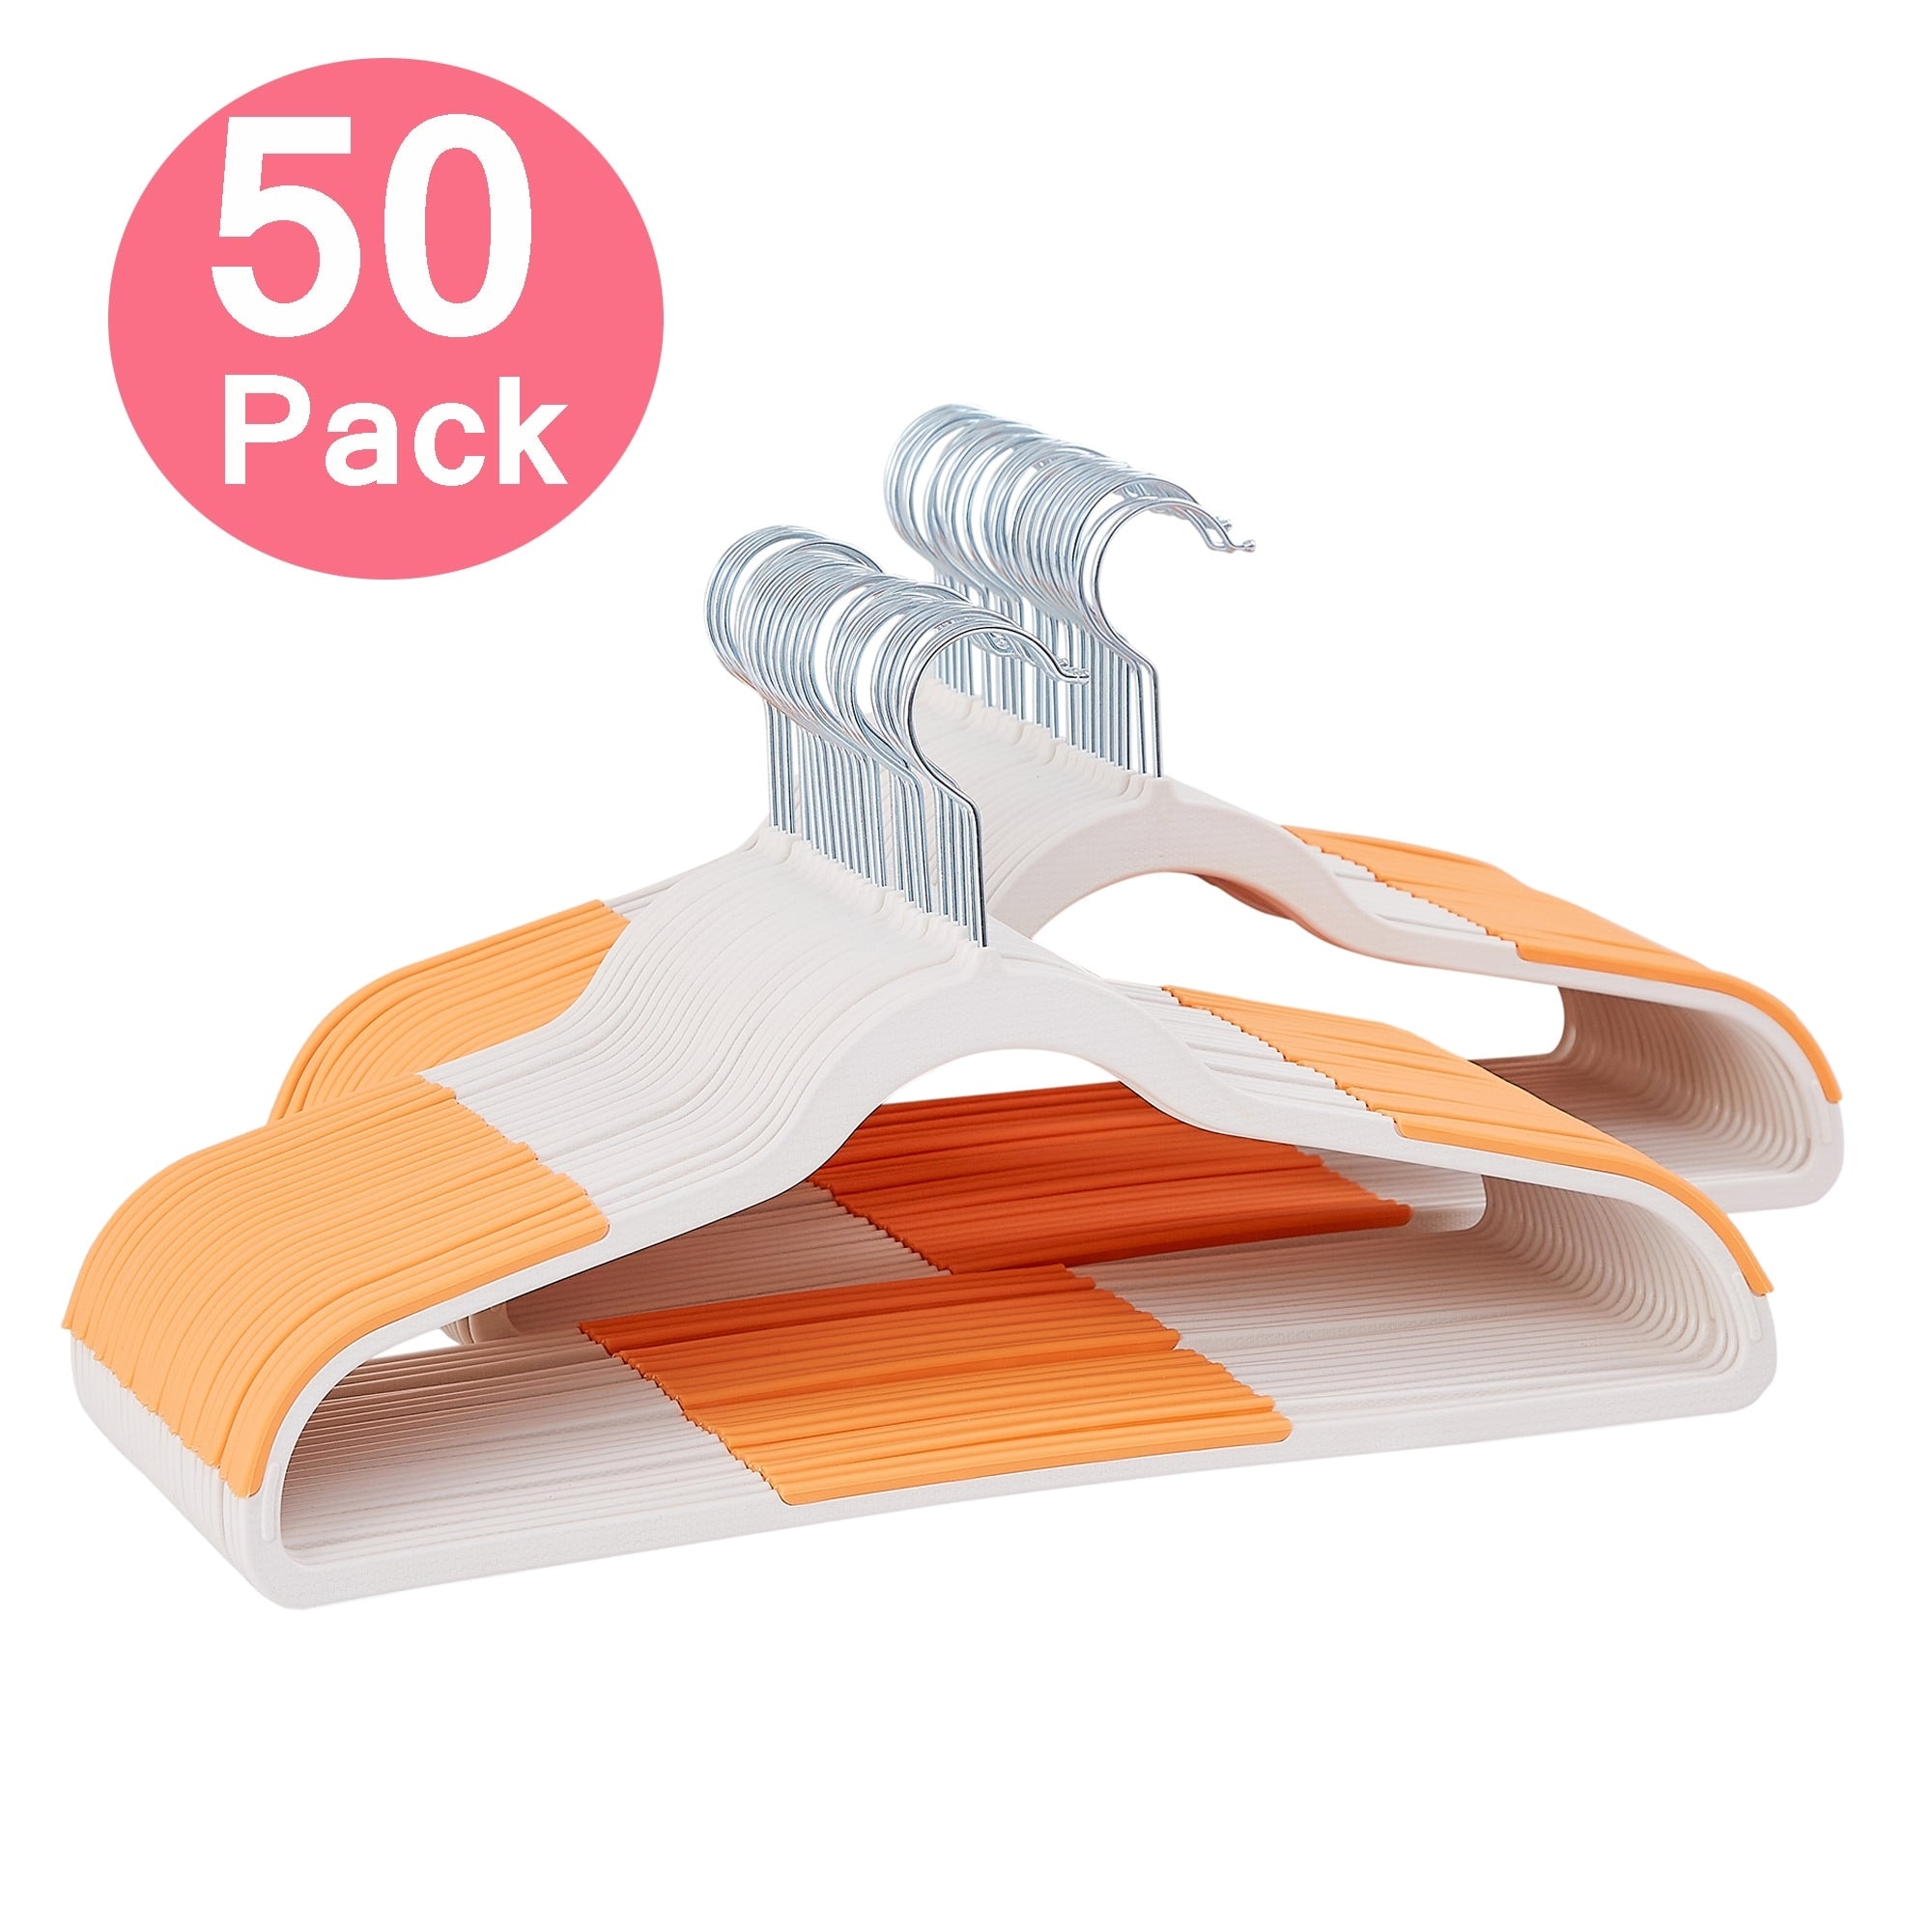 https://ak1.ostkcdn.com/images/products/is/images/direct/1b4f62612106d6b46257f847effb479e1e2d6232/Wet-and-Dry-Adult-Hangers-Holds-Up-To-10-Lbs%2825-50-Packs-Option%29.jpg